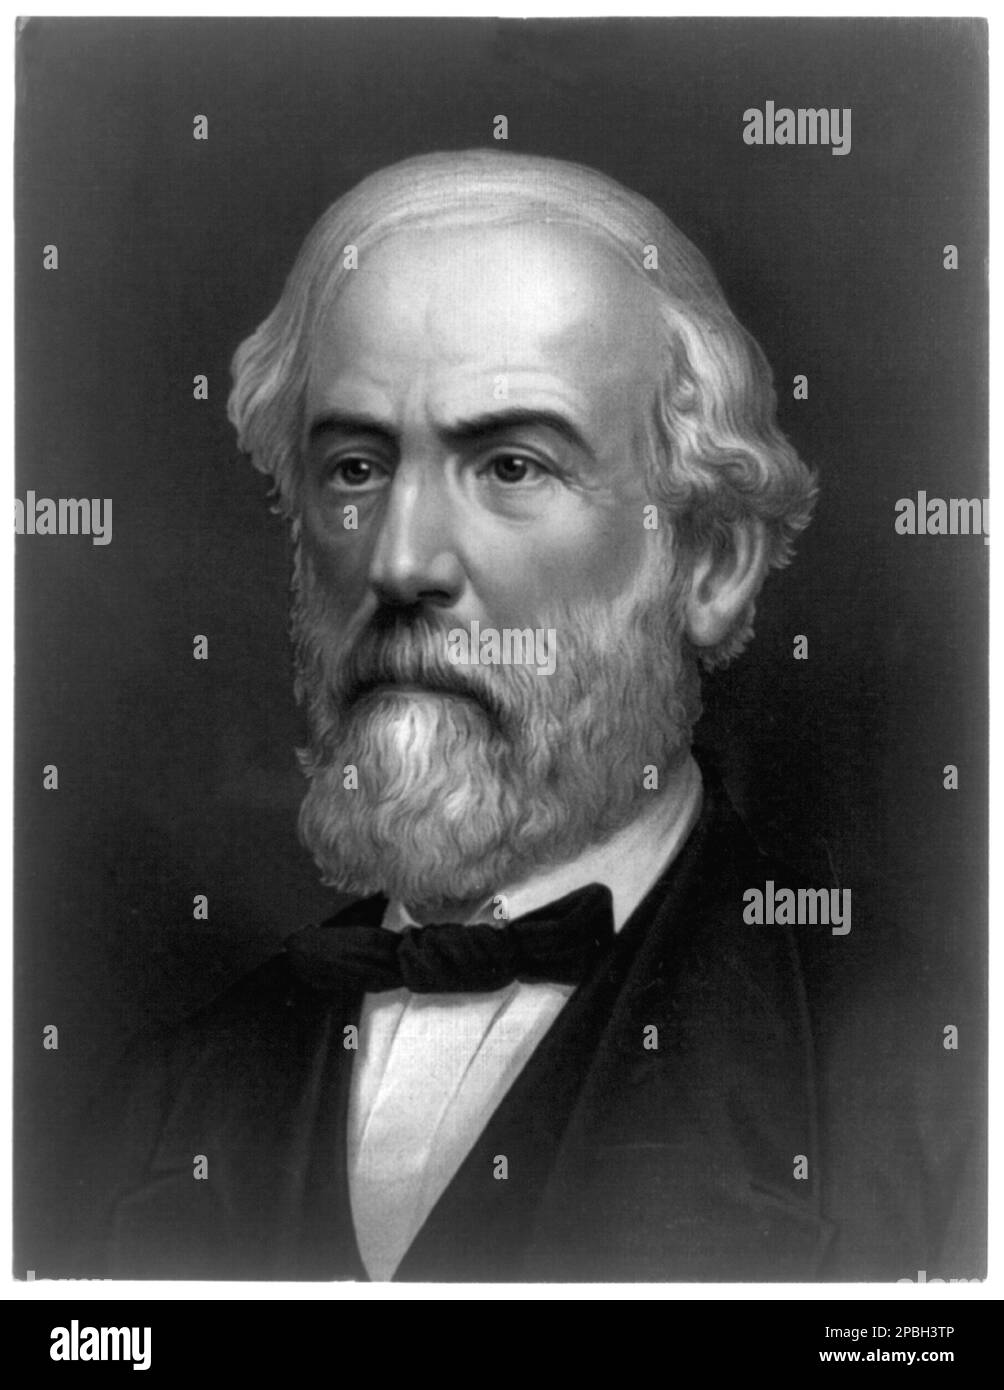 The  General ROBERT E. LEE  ( 1807 - 1870 ) of Confederate Army , chromolithograph portrait by Strobridge & Co. Lith. .  Lee was a career United States Army officer, an engineer, and among the most celebrated generals in American history. Lee was the son of Major General Henry Lee III 'Light Horse Harry' (1756–1818), Governor of Virginia, and his second wife, Anne Hill Carter (1773–1829). He was a descendant of Sir Thomas More and of King Robert II of Scotland through the Earls of Crawford .  A top graduate of West Point, Lee distinguished himself as an exceptional soldier in the U.S. Army for Stock Photo